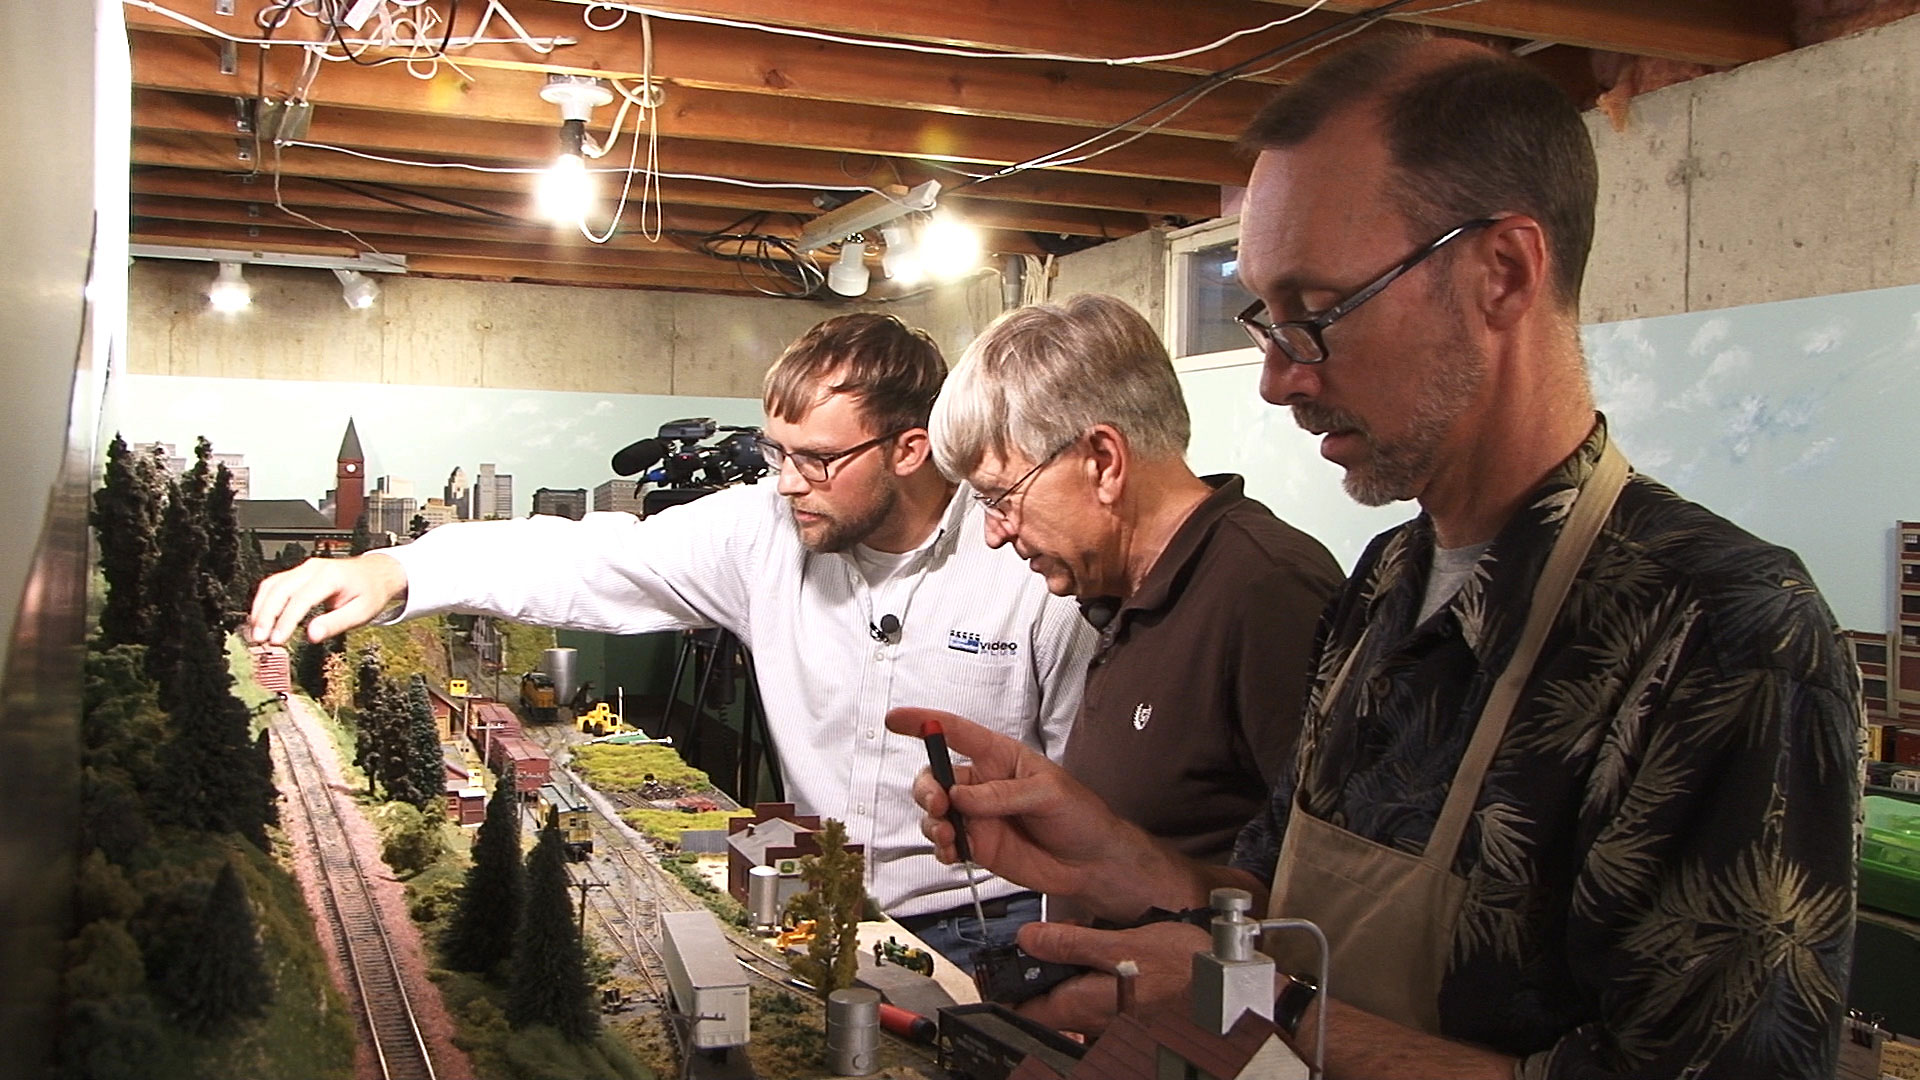 Three people from a model railroader club working together on a layout